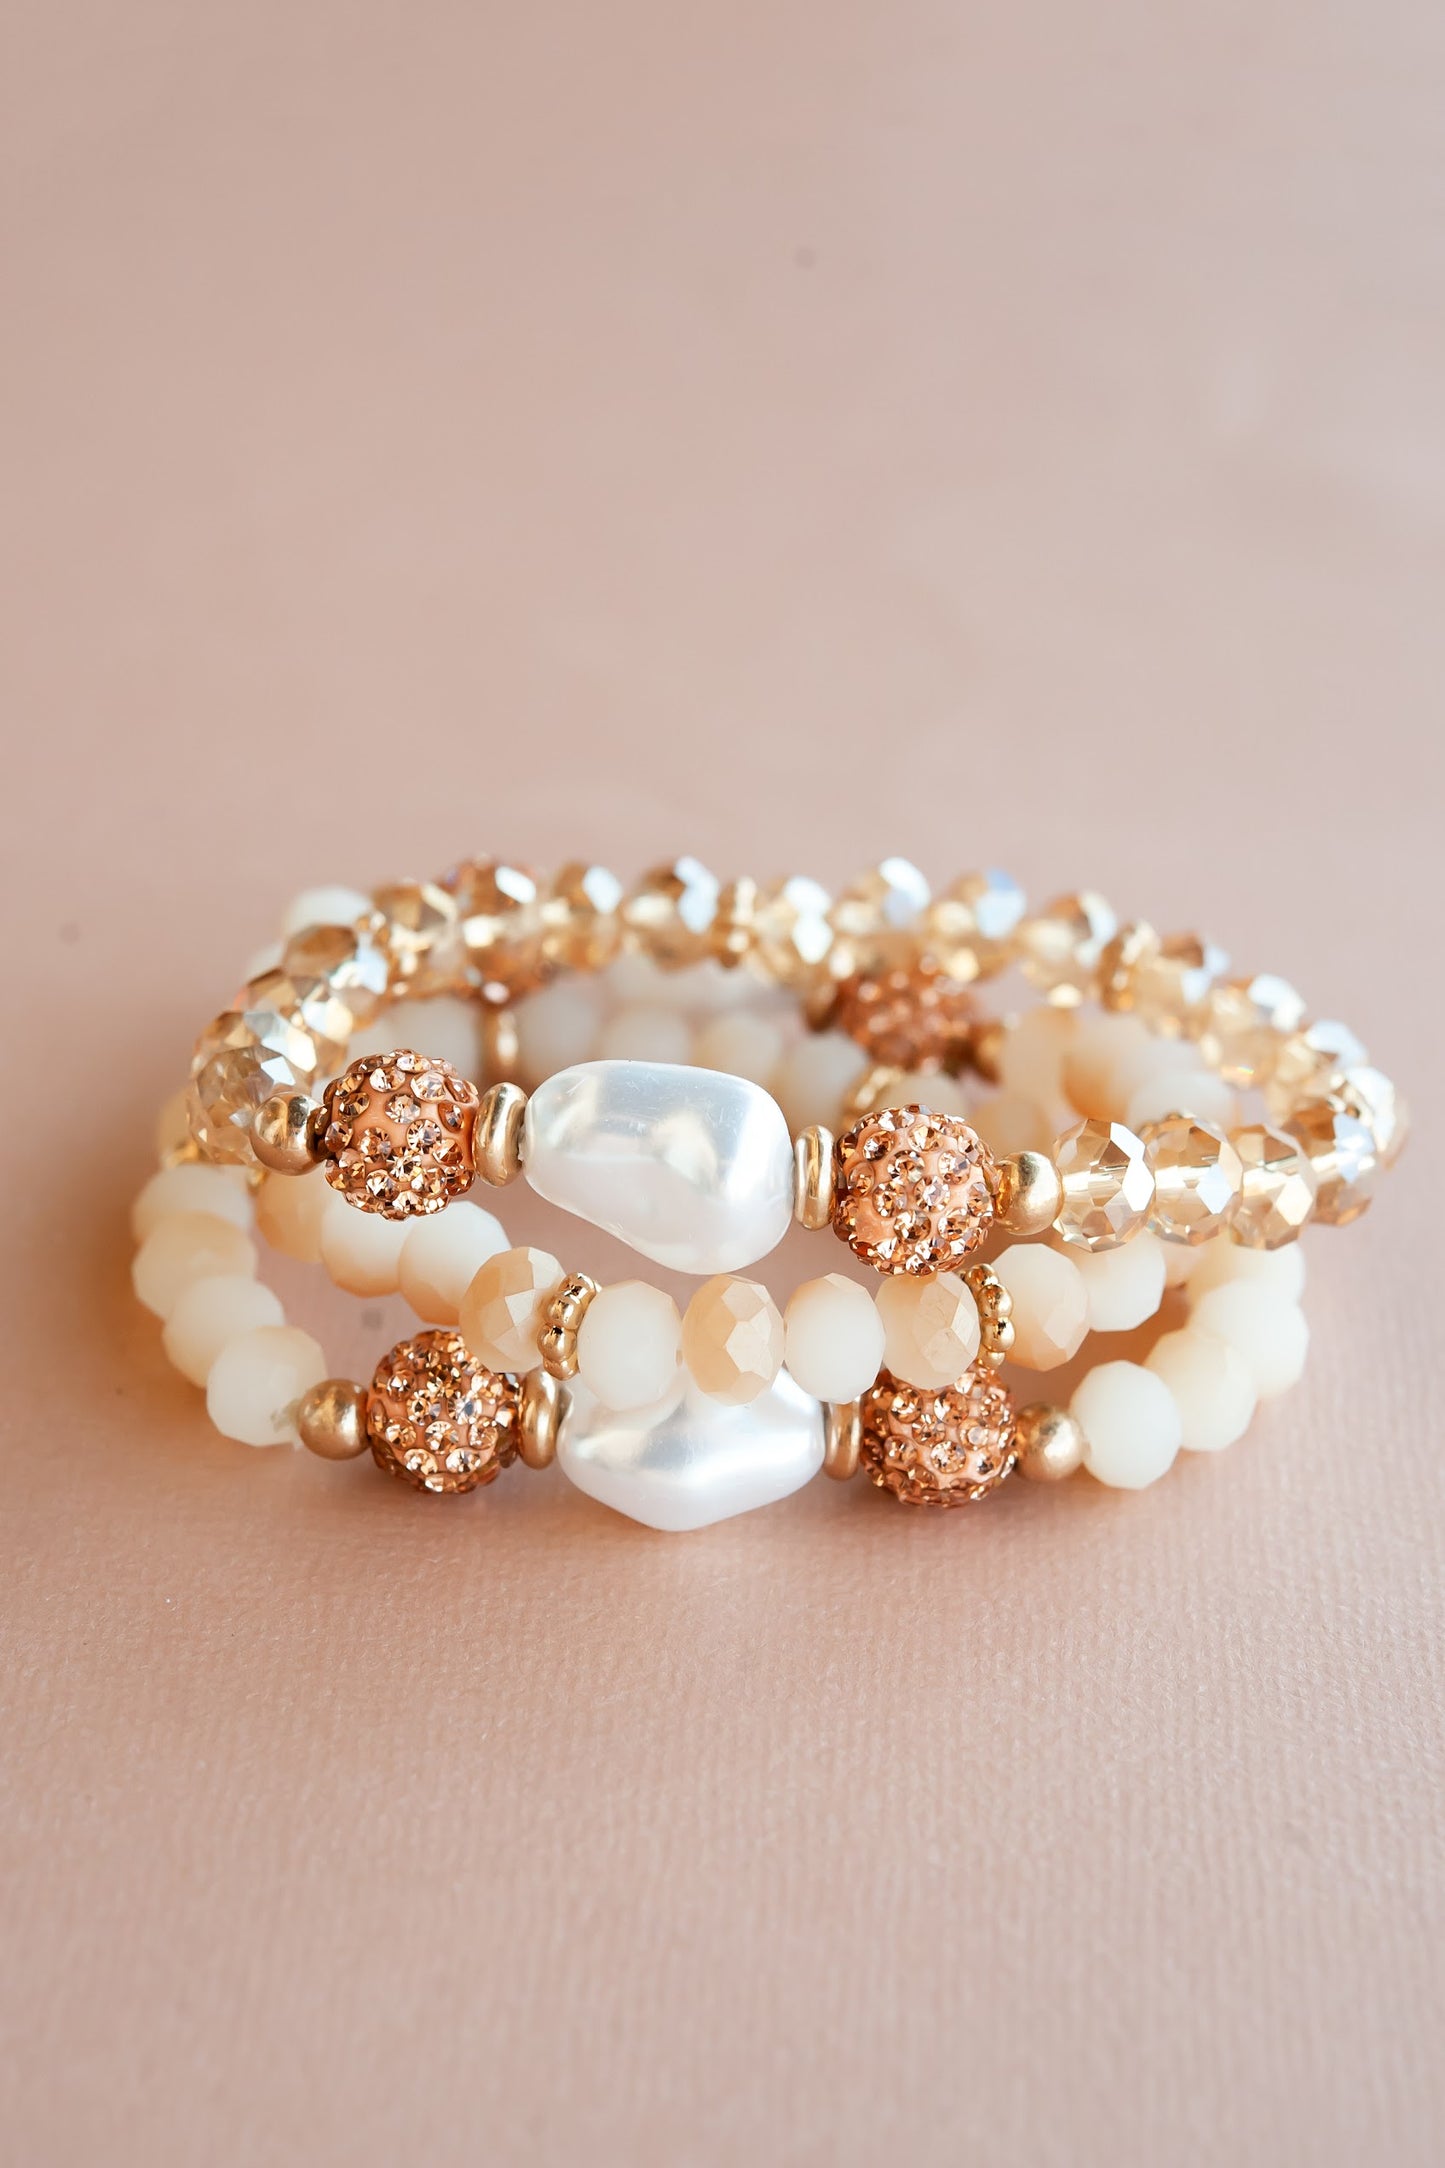 Buy Lilly & Sparkle Women Gold-Toned Cup Chain Crystal Studded Pearl Link Bracelet  Set of 3 online